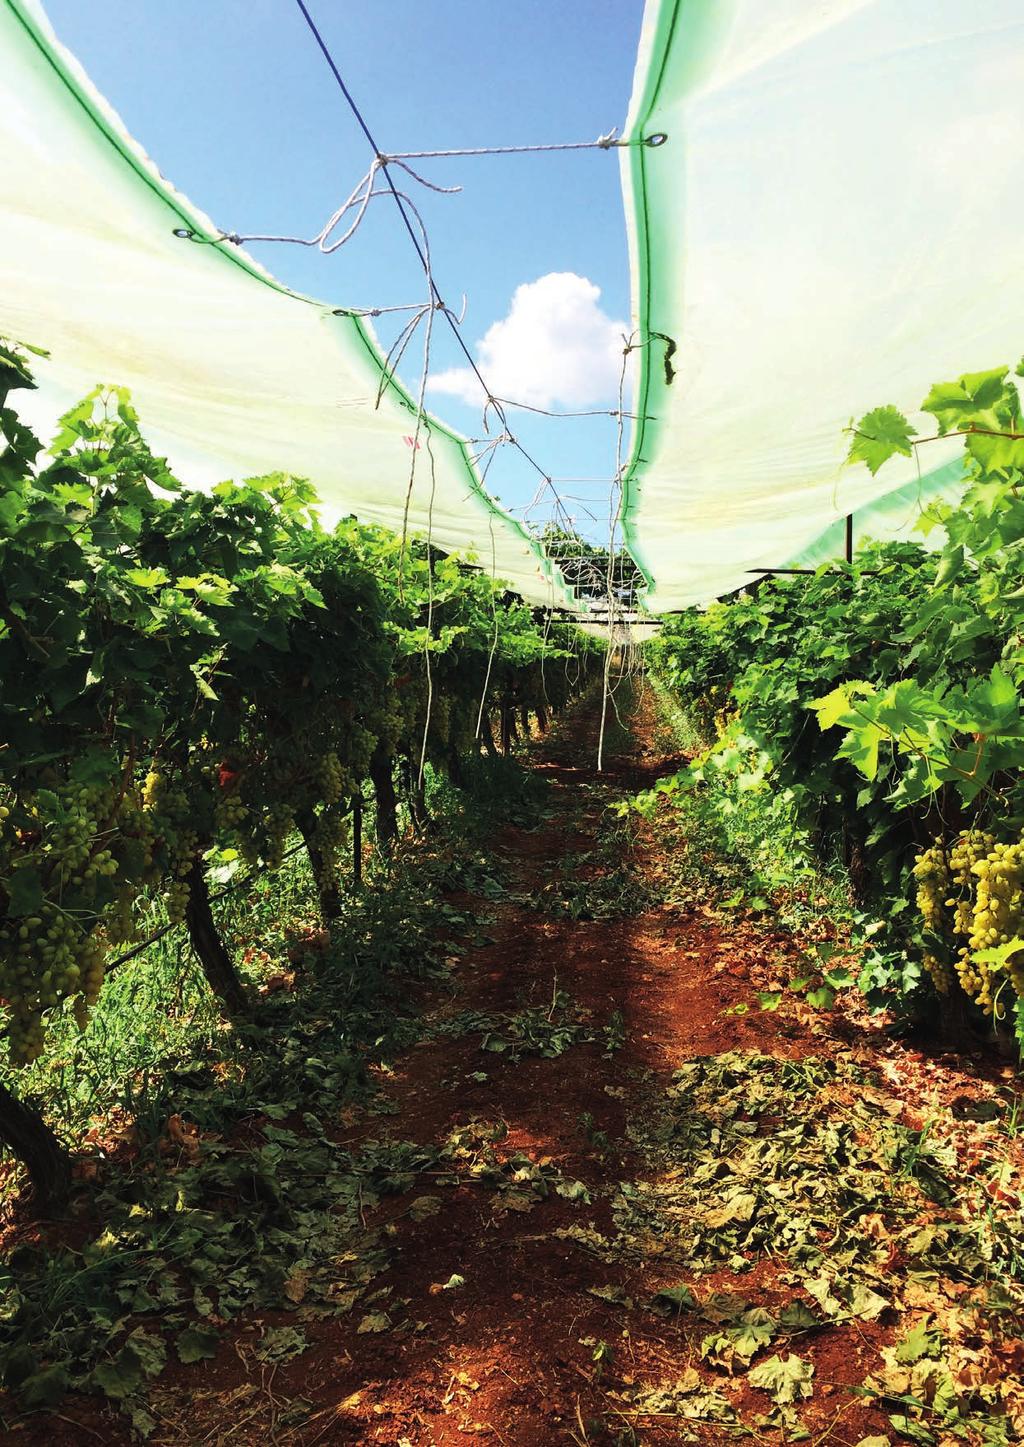 What did we achieve? The prime objective of improving the quality and marketability of Pegasus table grapes was achieved within five years after this Food Chain Partnership began.